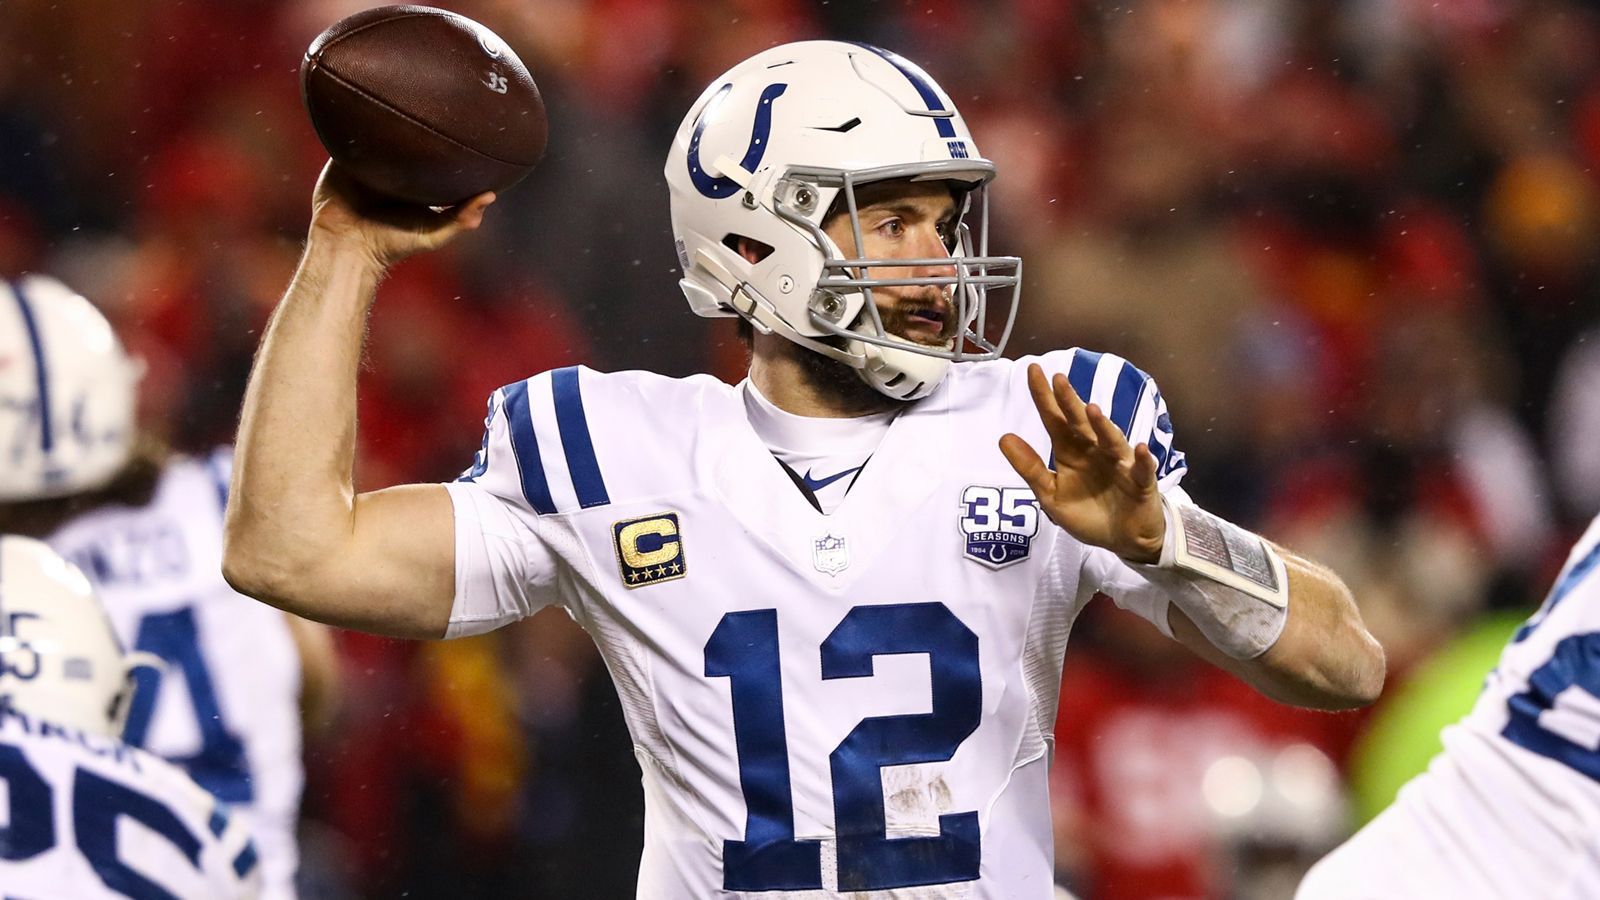 
                <strong>Indianapolis Colts: Andrew Luck (QB)</strong><br>
                122.970.000 Dollar (Laufzeit: sechs Jahre)
              